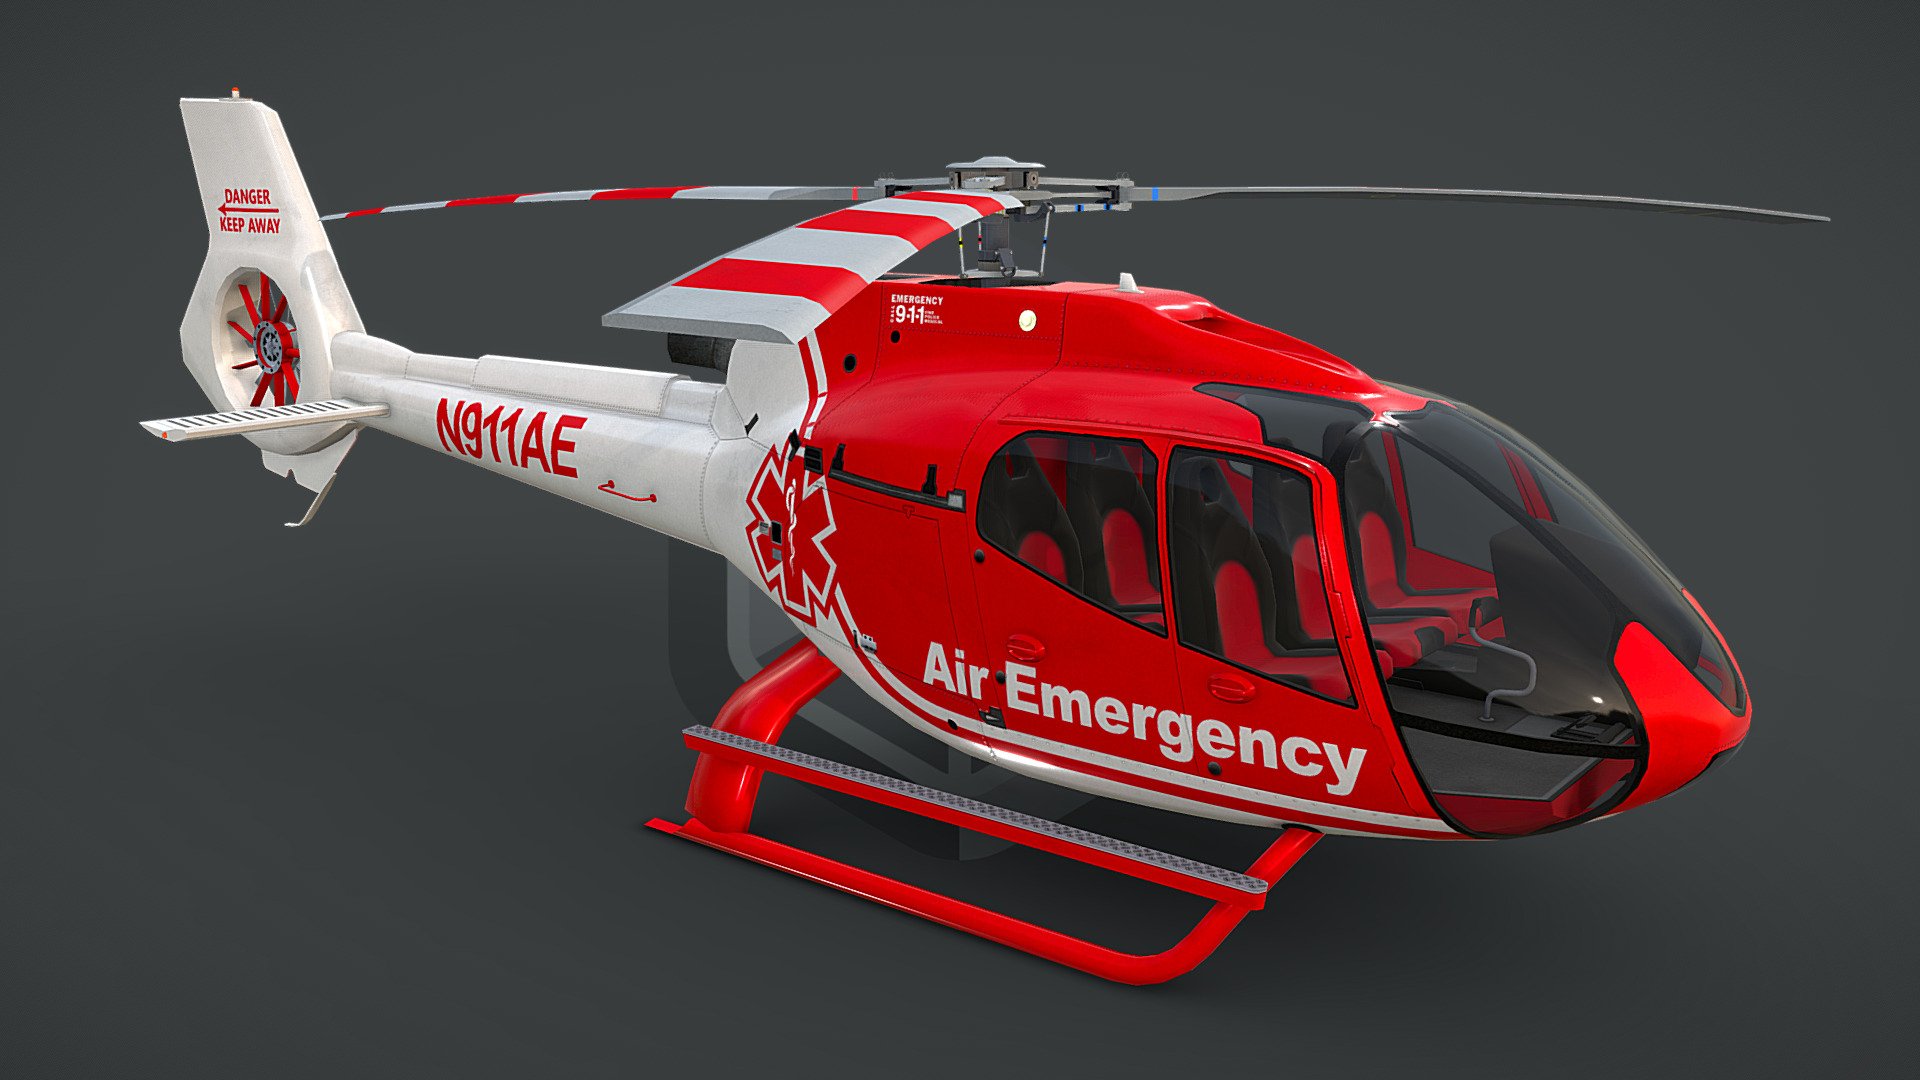 game ready, realtime optimized game asset

unique livery and branding

both PBR workflows ready

LOD0 is HQ lowpoly with bended top rotor, all lights objects and interior

LOD0 19710 tris, LOD1 10462 tris, LOD2 7388 tris, LOD3 5990 tris

100% triangulated and 100% unwrapped non-overlapping

5 x uv layouts, body, HQ rotors, LQ rotors, interior, lights

made using blueprints, real world scale meters

all rotors detached and animable in each LOD with properly placed pivots for flawless animations

hideable capsule built interior that fits perfectly the body

interior is simple but a great basis for further elaboration

big textures pack with native 4096 x 4096 px textures for body, rotors, interior

LOD3 rotors have own textures with blades on alpha channel

light objects have own, small, textures, and contain an emission map

pack contains native .max scene, created in 3dsmax 2014

pack contains clean and flawless FBX and OBJ files

each LOD and all LOD together exported in each file format
 - Air Emergency Helicopter EC130-H130 Livery 4 - Buy Royalty Free 3D model by CGAmp 3d model